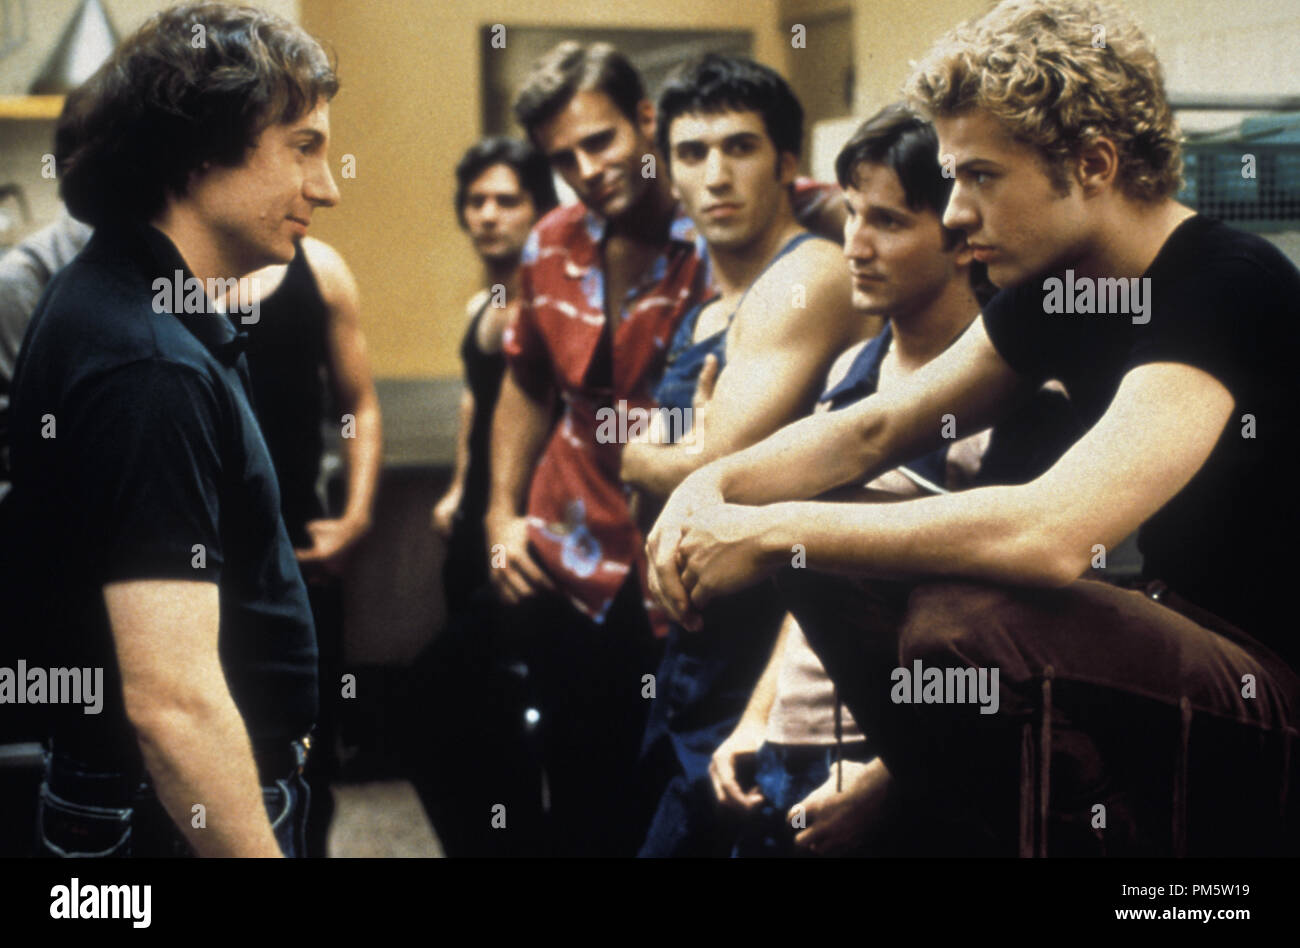 Film Still from '54' Mike Myers, Breckin Meyer, Ryan Phillippe © 1998 Miramax Photo Credit: Kerry Hayes  File Reference # 30996669THA  For Editorial Use Only -  All Rights Reserved Stock Photo